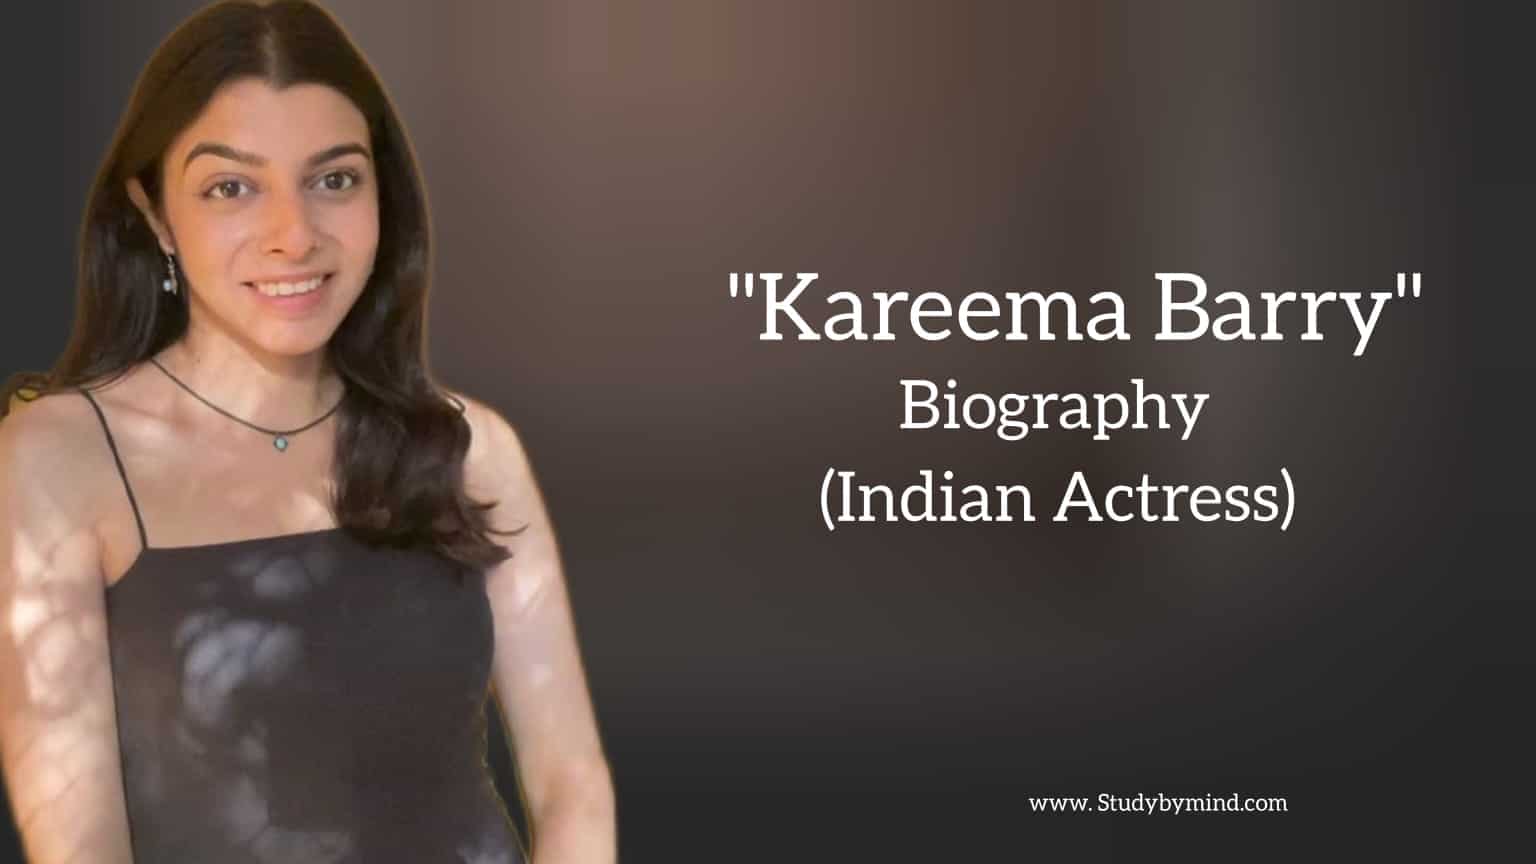 You are currently viewing Kareema barry biography in english (Indian actress)